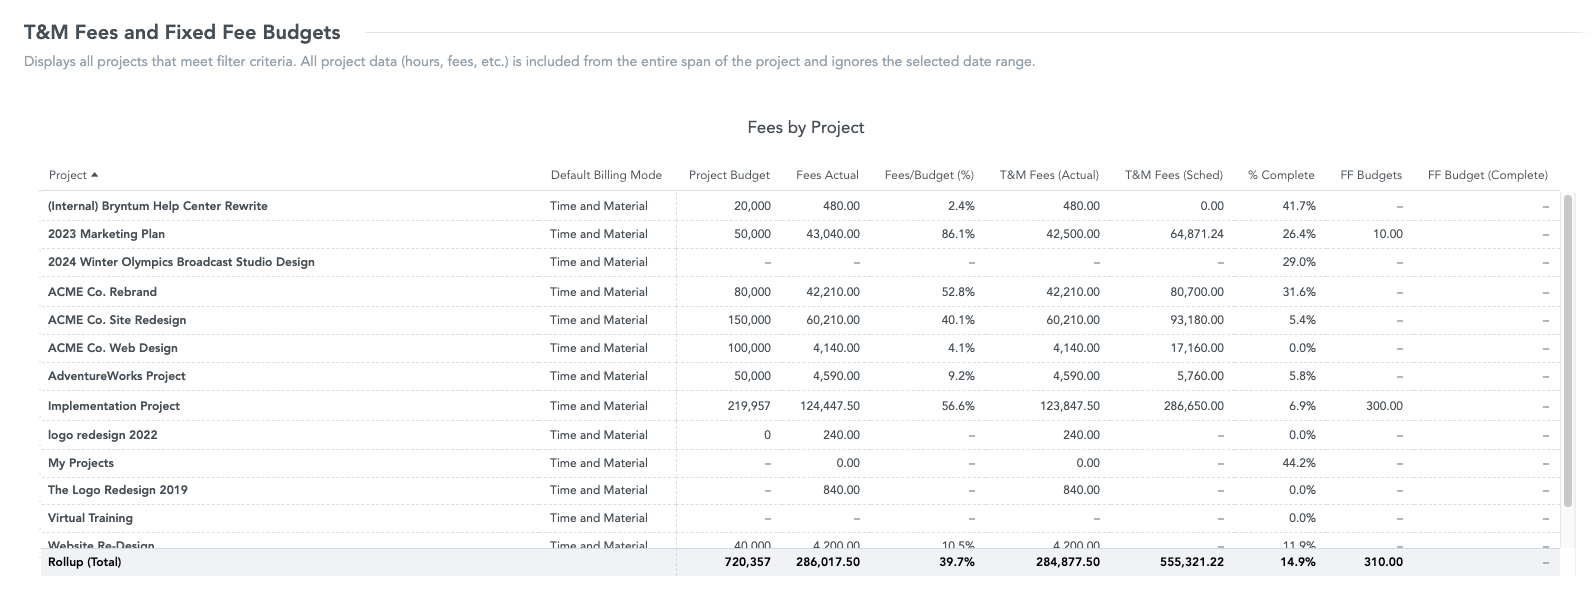 Finances-Fees_T&M Fees and Fixed Fees by Project.png